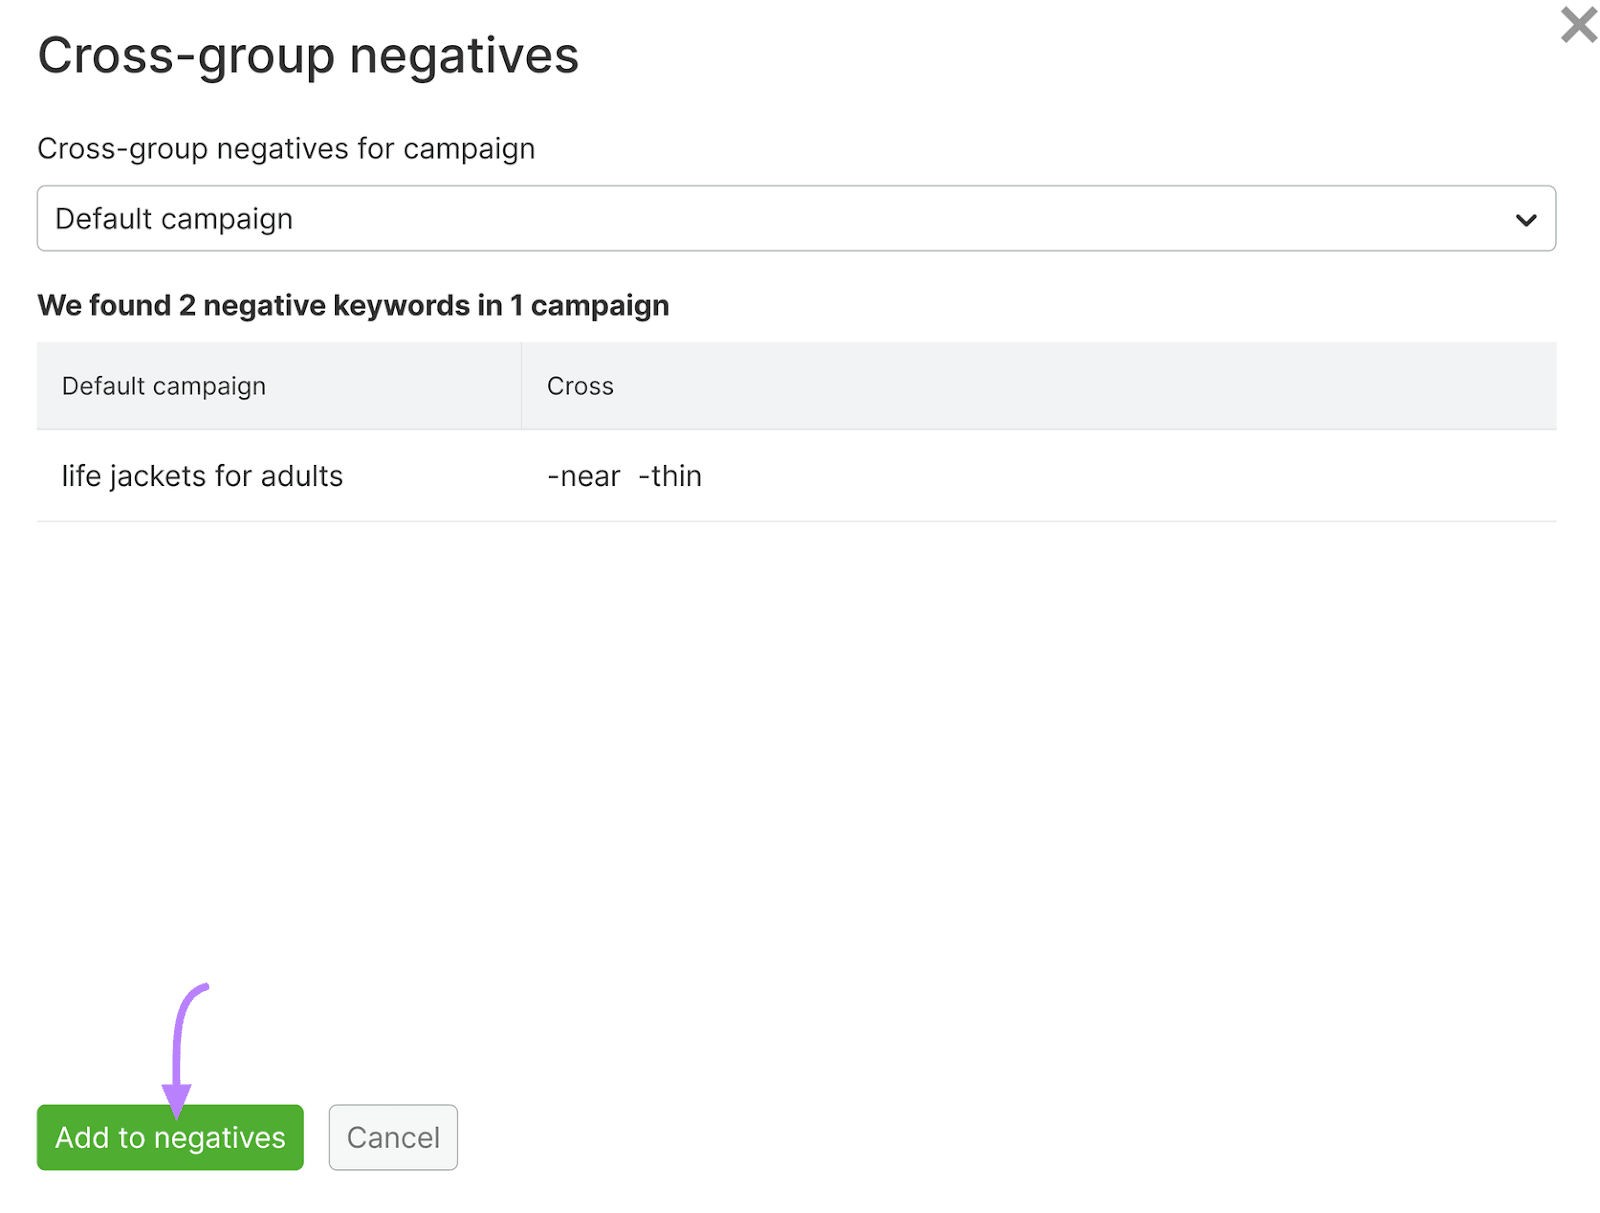 Interface showing cross-group negatives, with 2 keywords found and an "Add to negatives" call-to-action button highlighted.